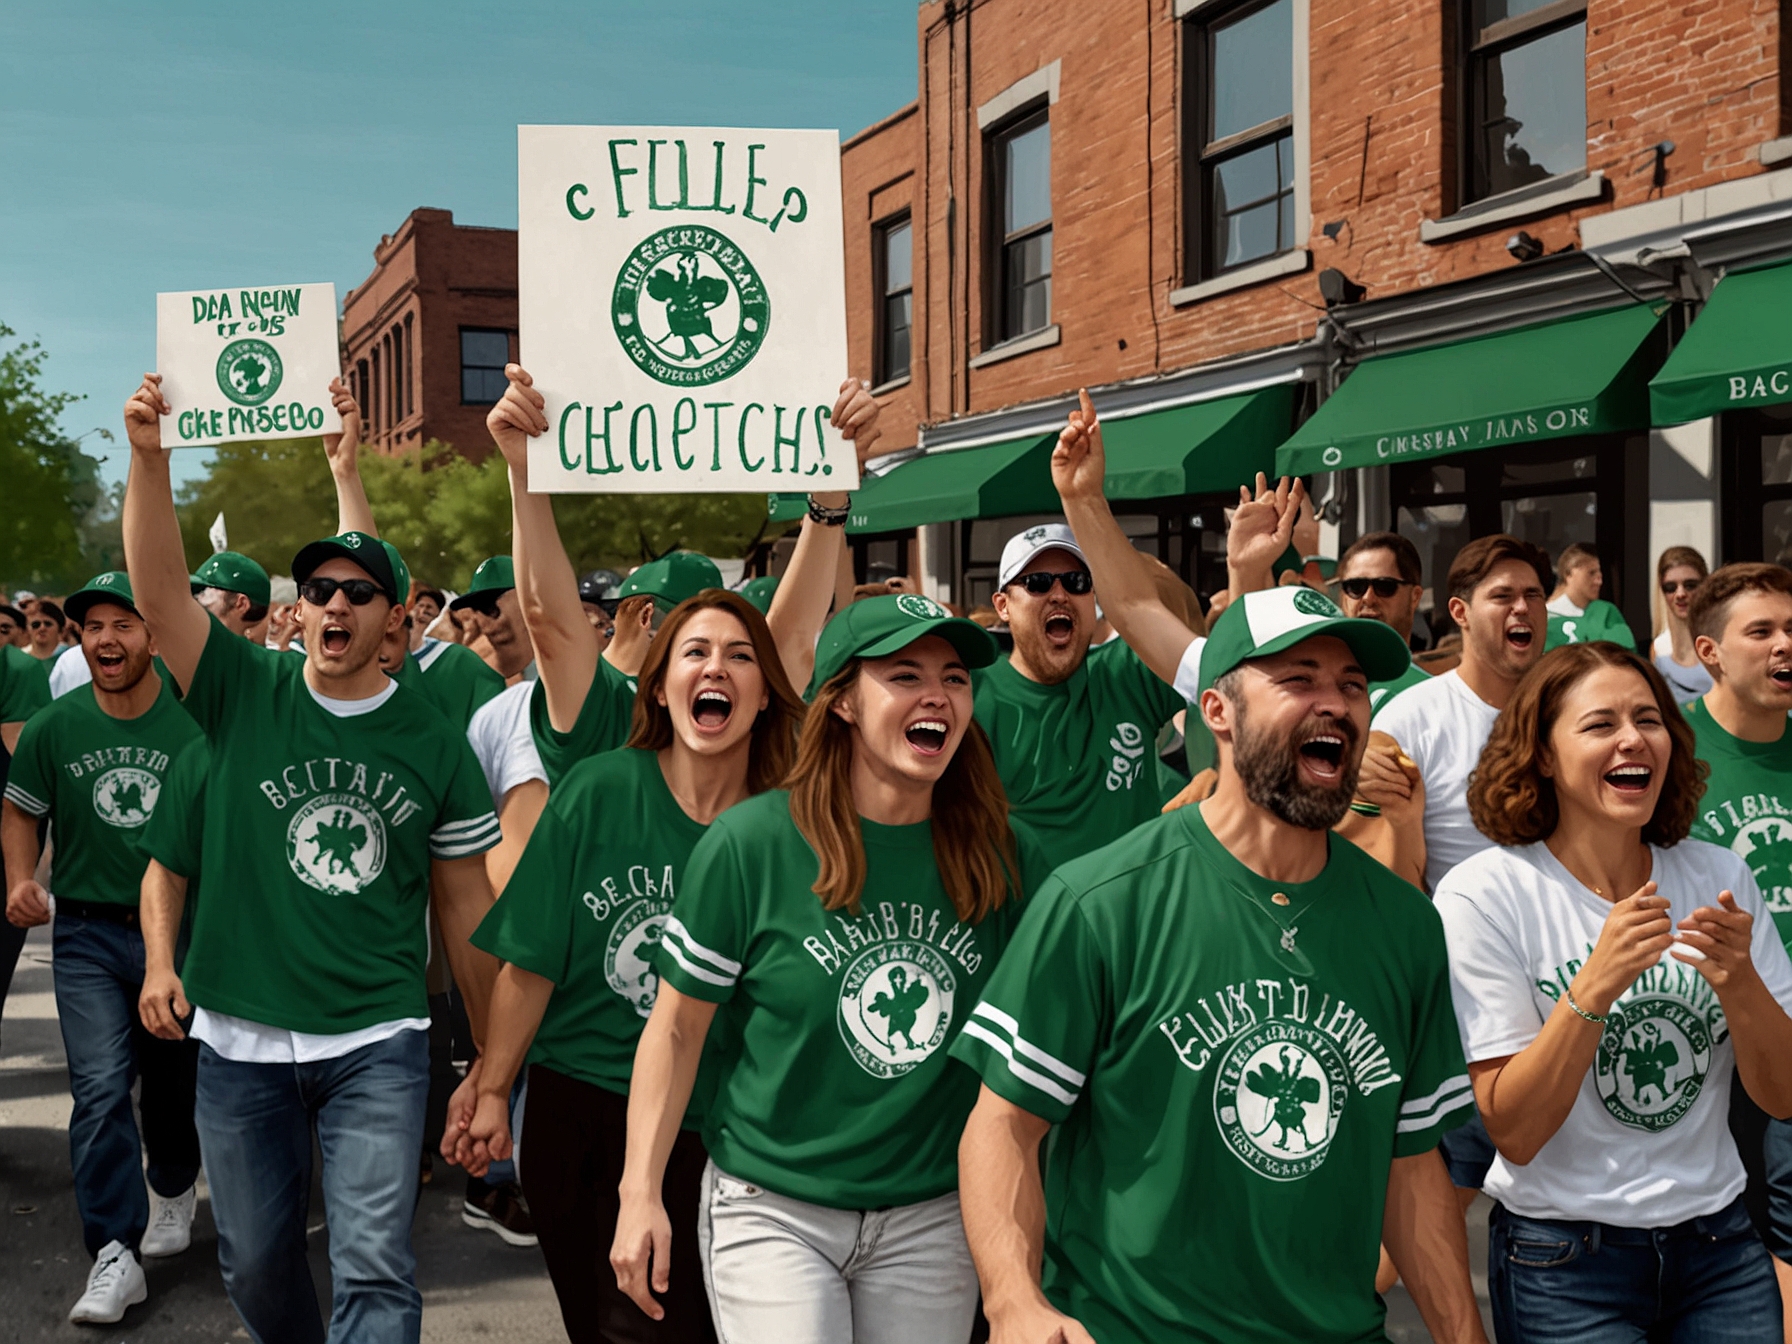 A joyful crowd of Boston Celtics fans wearing green and white, holding signs and chanting team slogans during the parade, celebrating their NBA Championship victory.